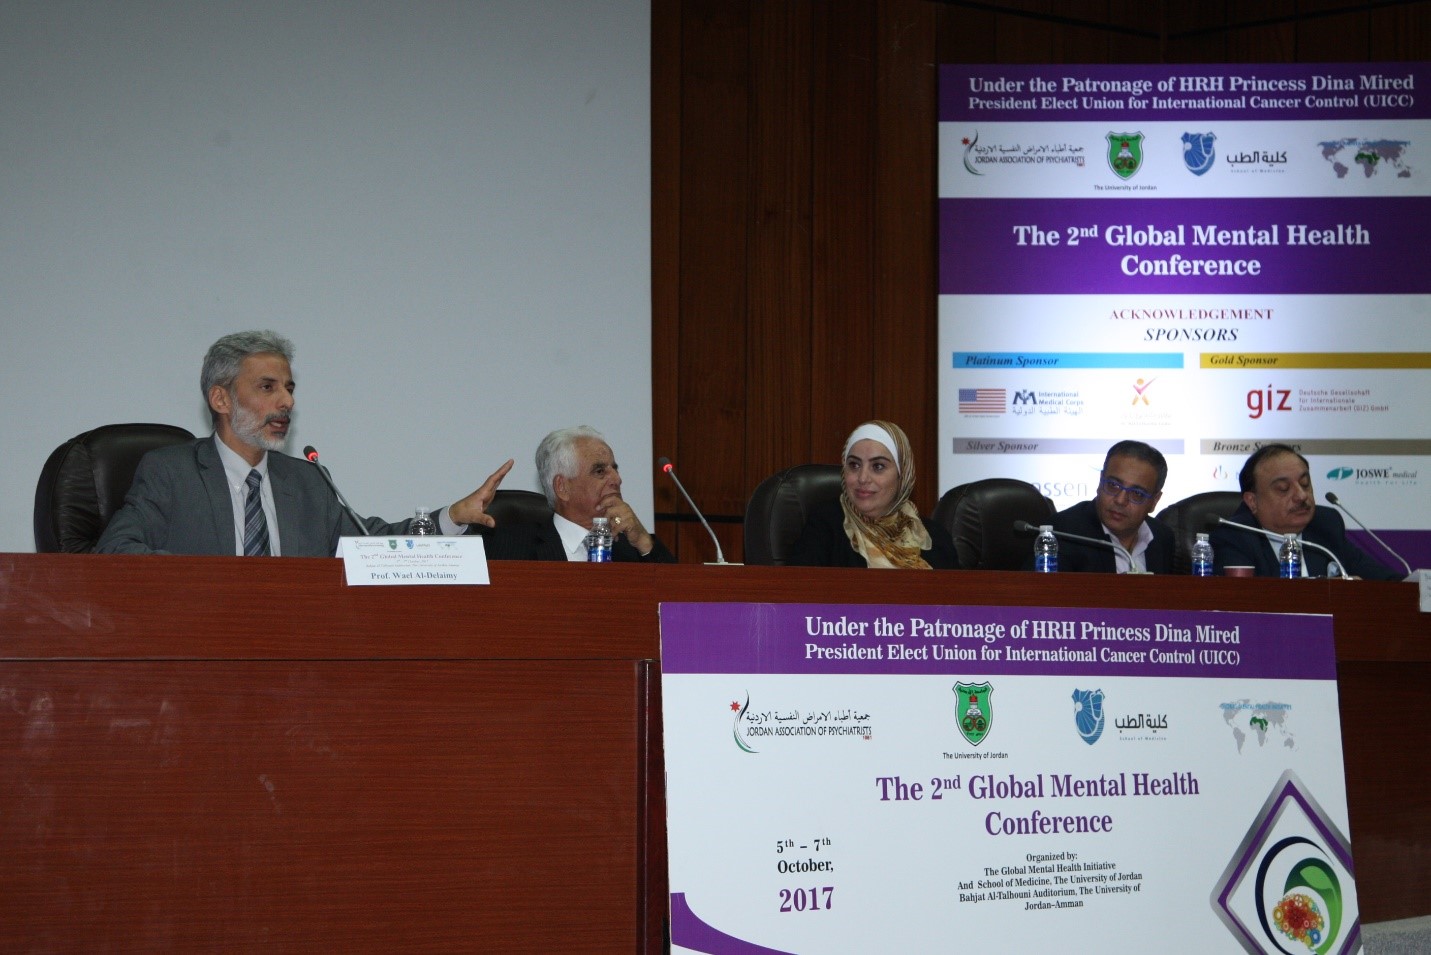  Dr. Al-Delaimy from GMH leading a discussion about a proposed Mental Health Act, to his left is a Jordanian Constitutional Judge, a member of the Jordanian Parliament, Professor of Political Sciences at the University of Jordan, and Chair of the Jordanian Psychiatric Association. 